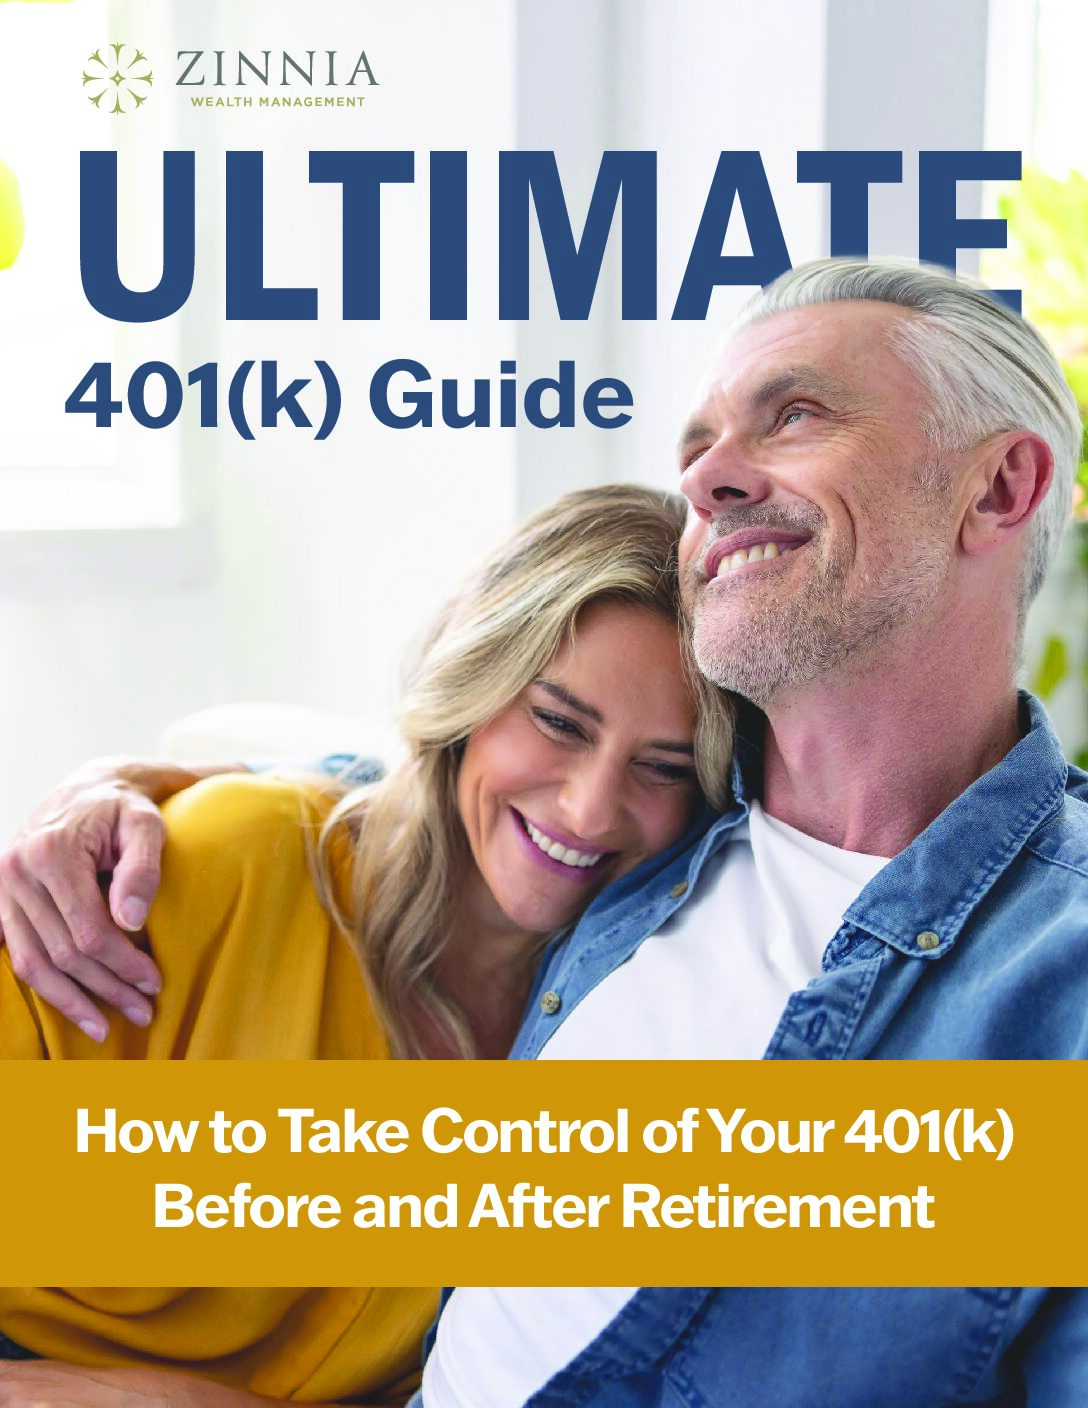 The Ultimate 401k Guide